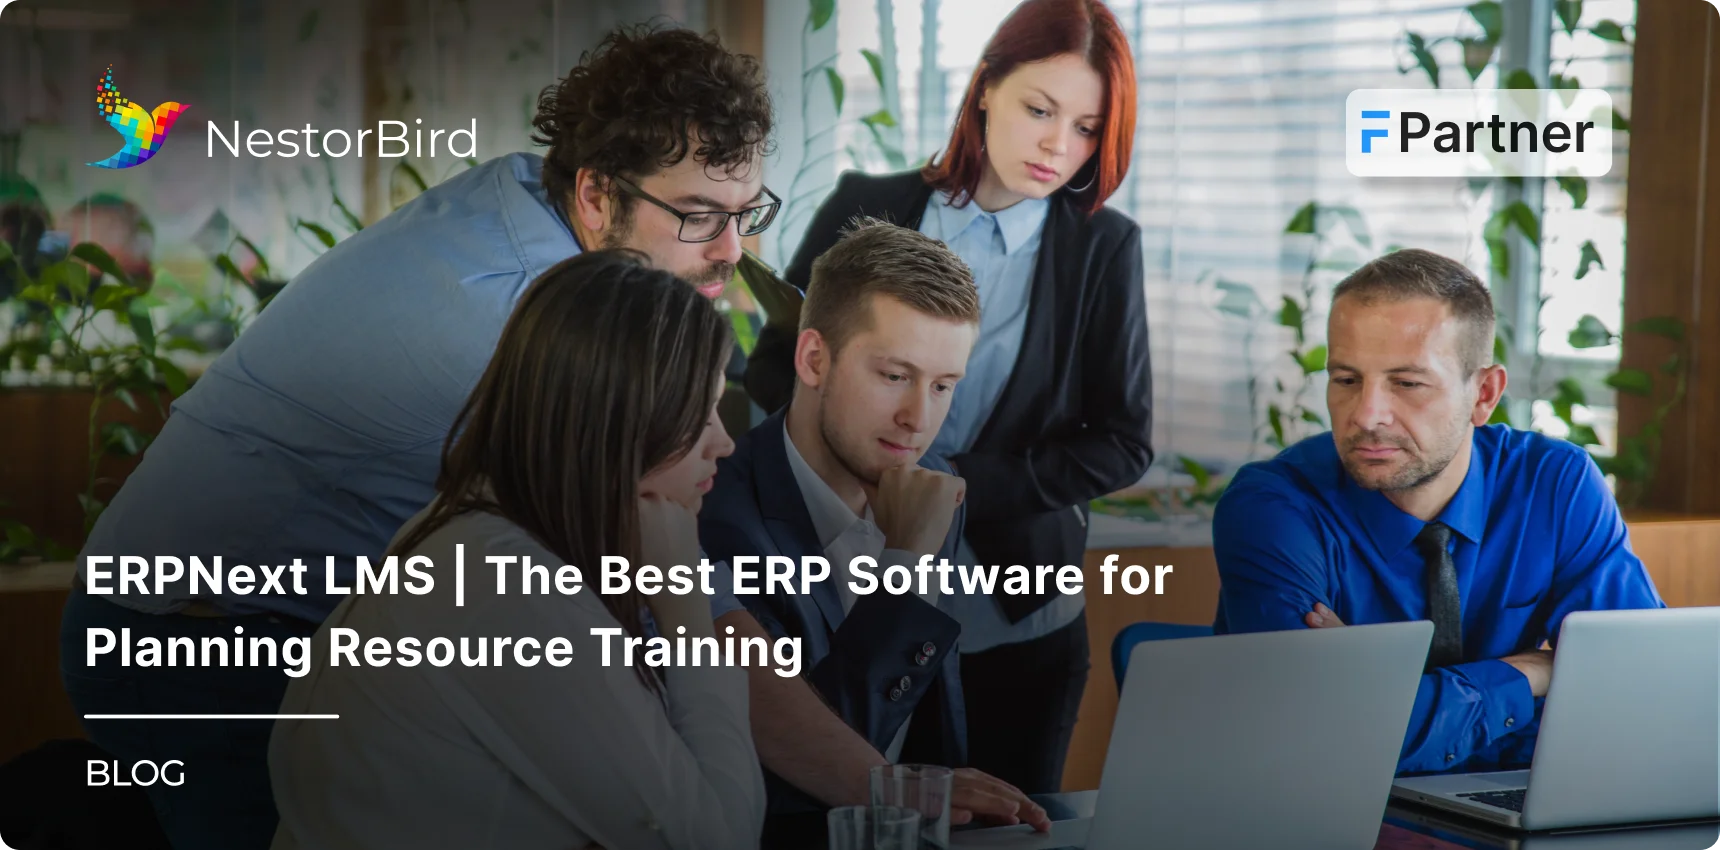 ERPNext LMS | The Best ERP Software for Planning Resource Training